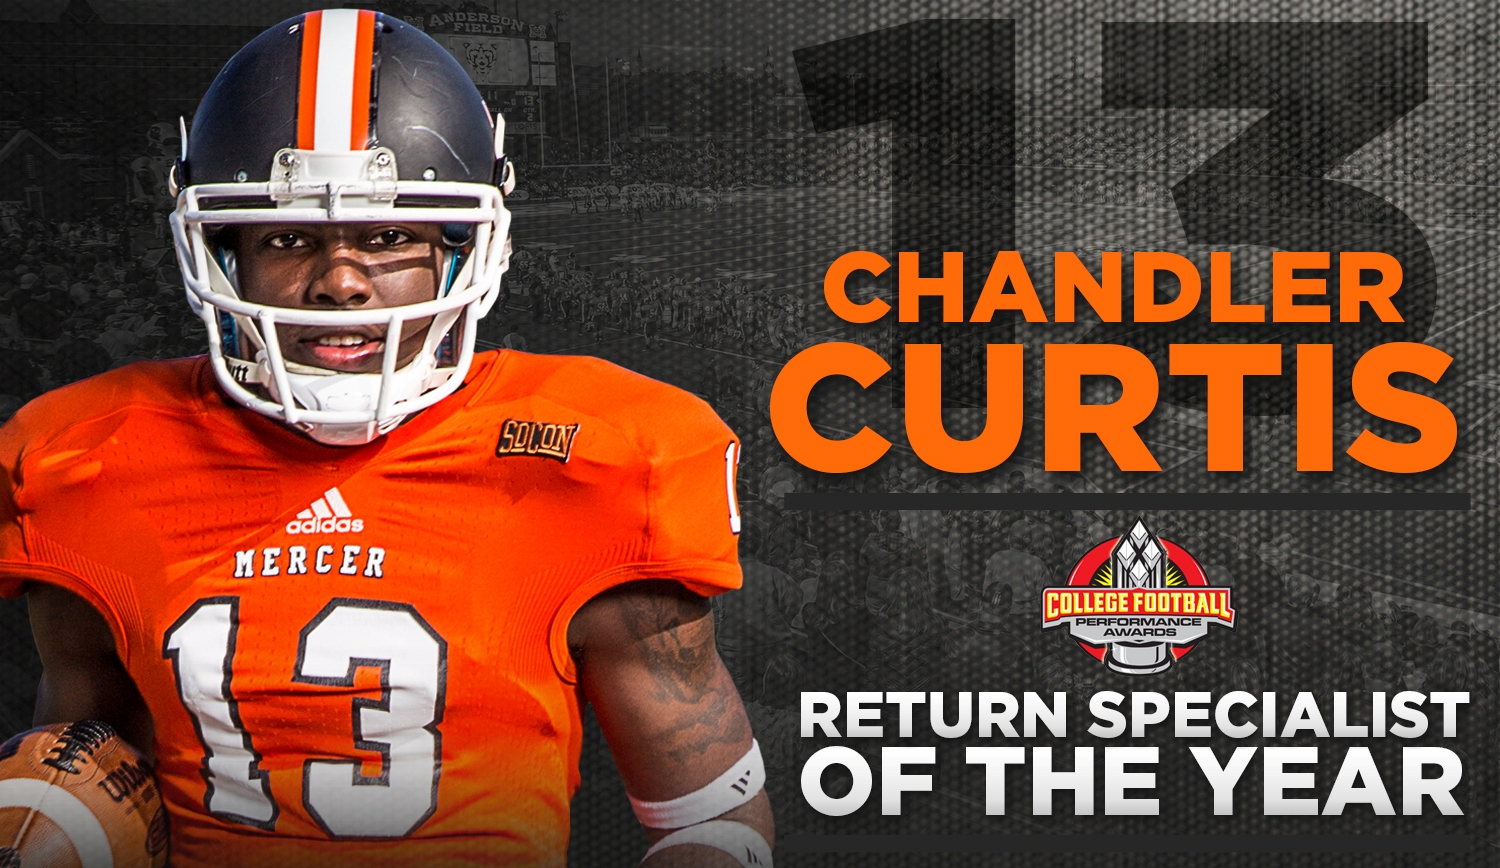 Chandler Curtis - 2014 CFPA FCS National Return Specialist of the Year